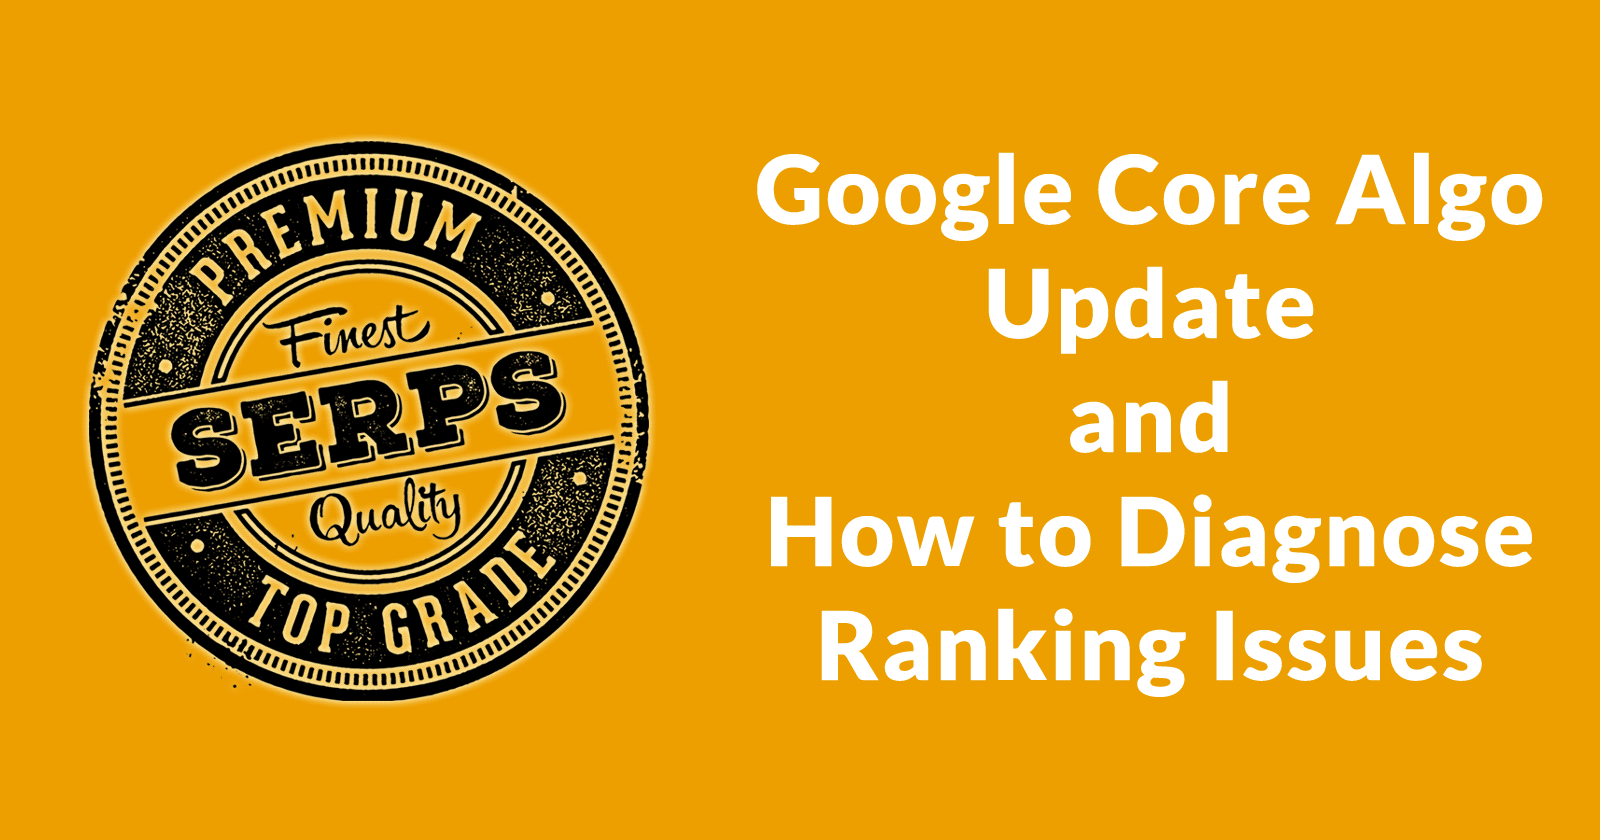 Why You Shouldn’t Panic About Unofficial Google Updates